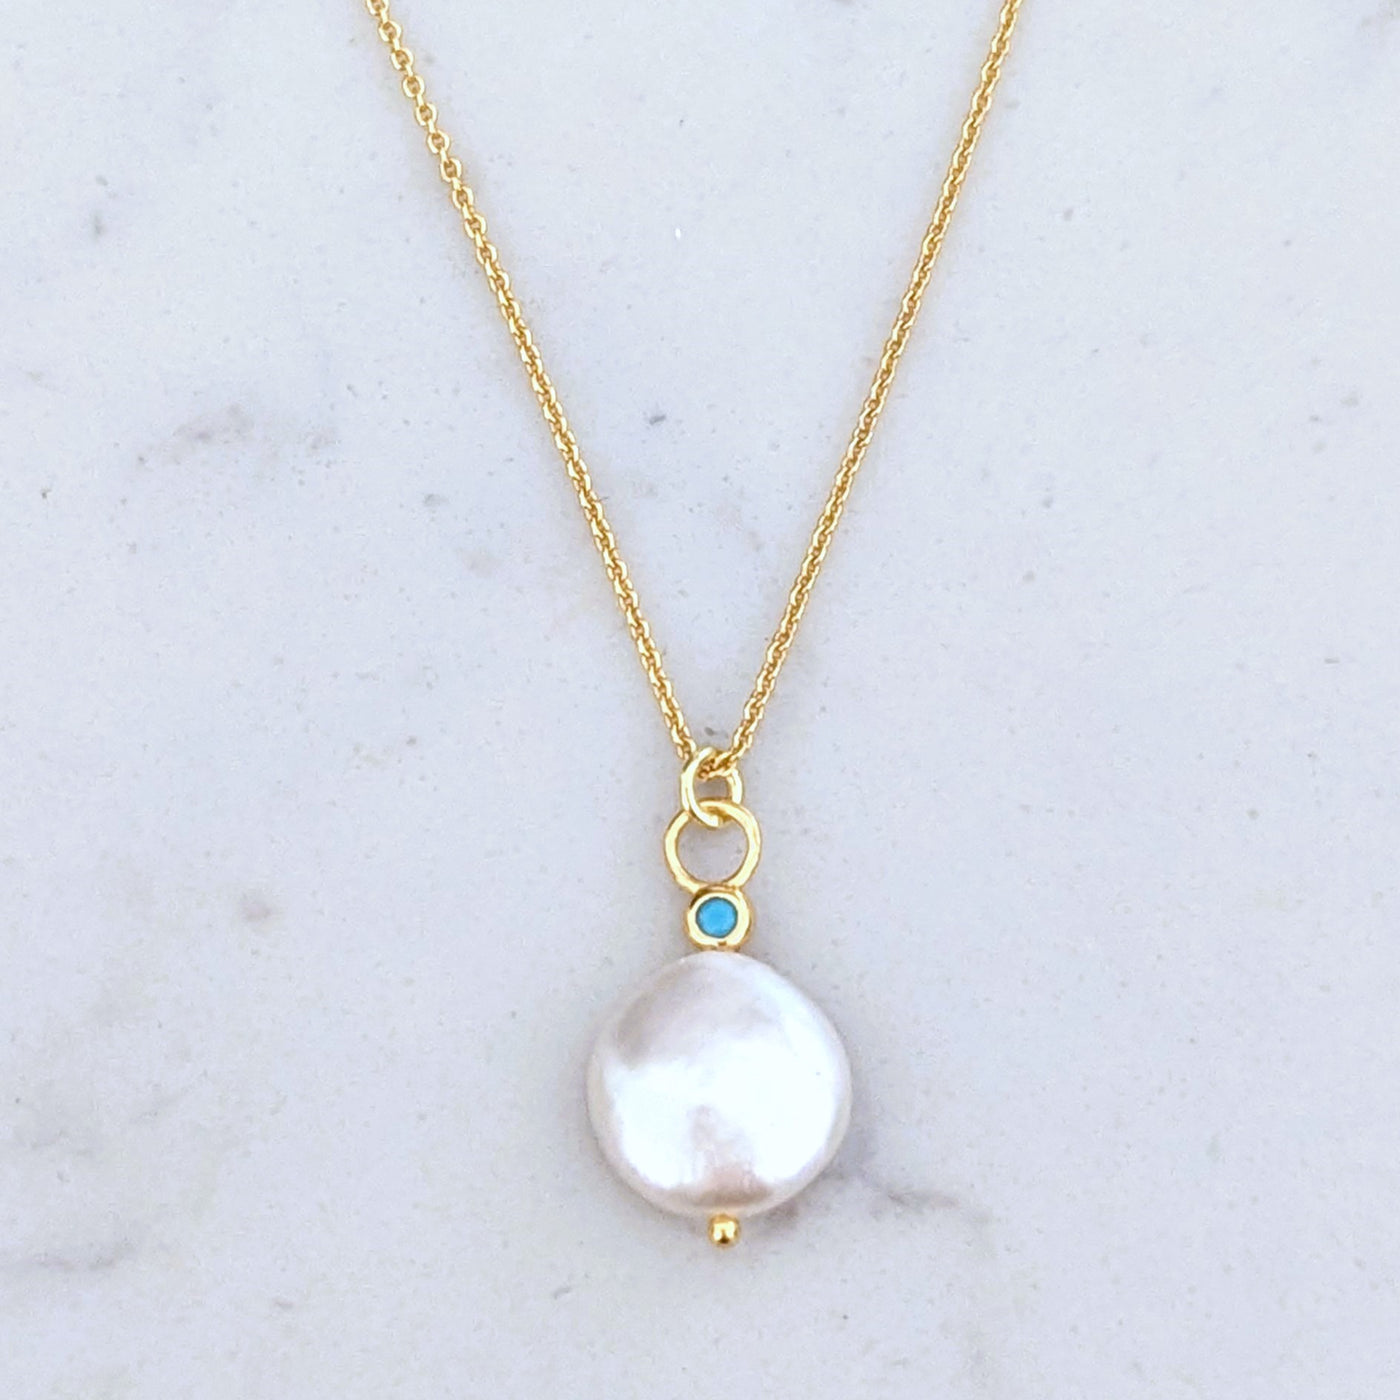 baroque pearl and turquoise pendant necklace